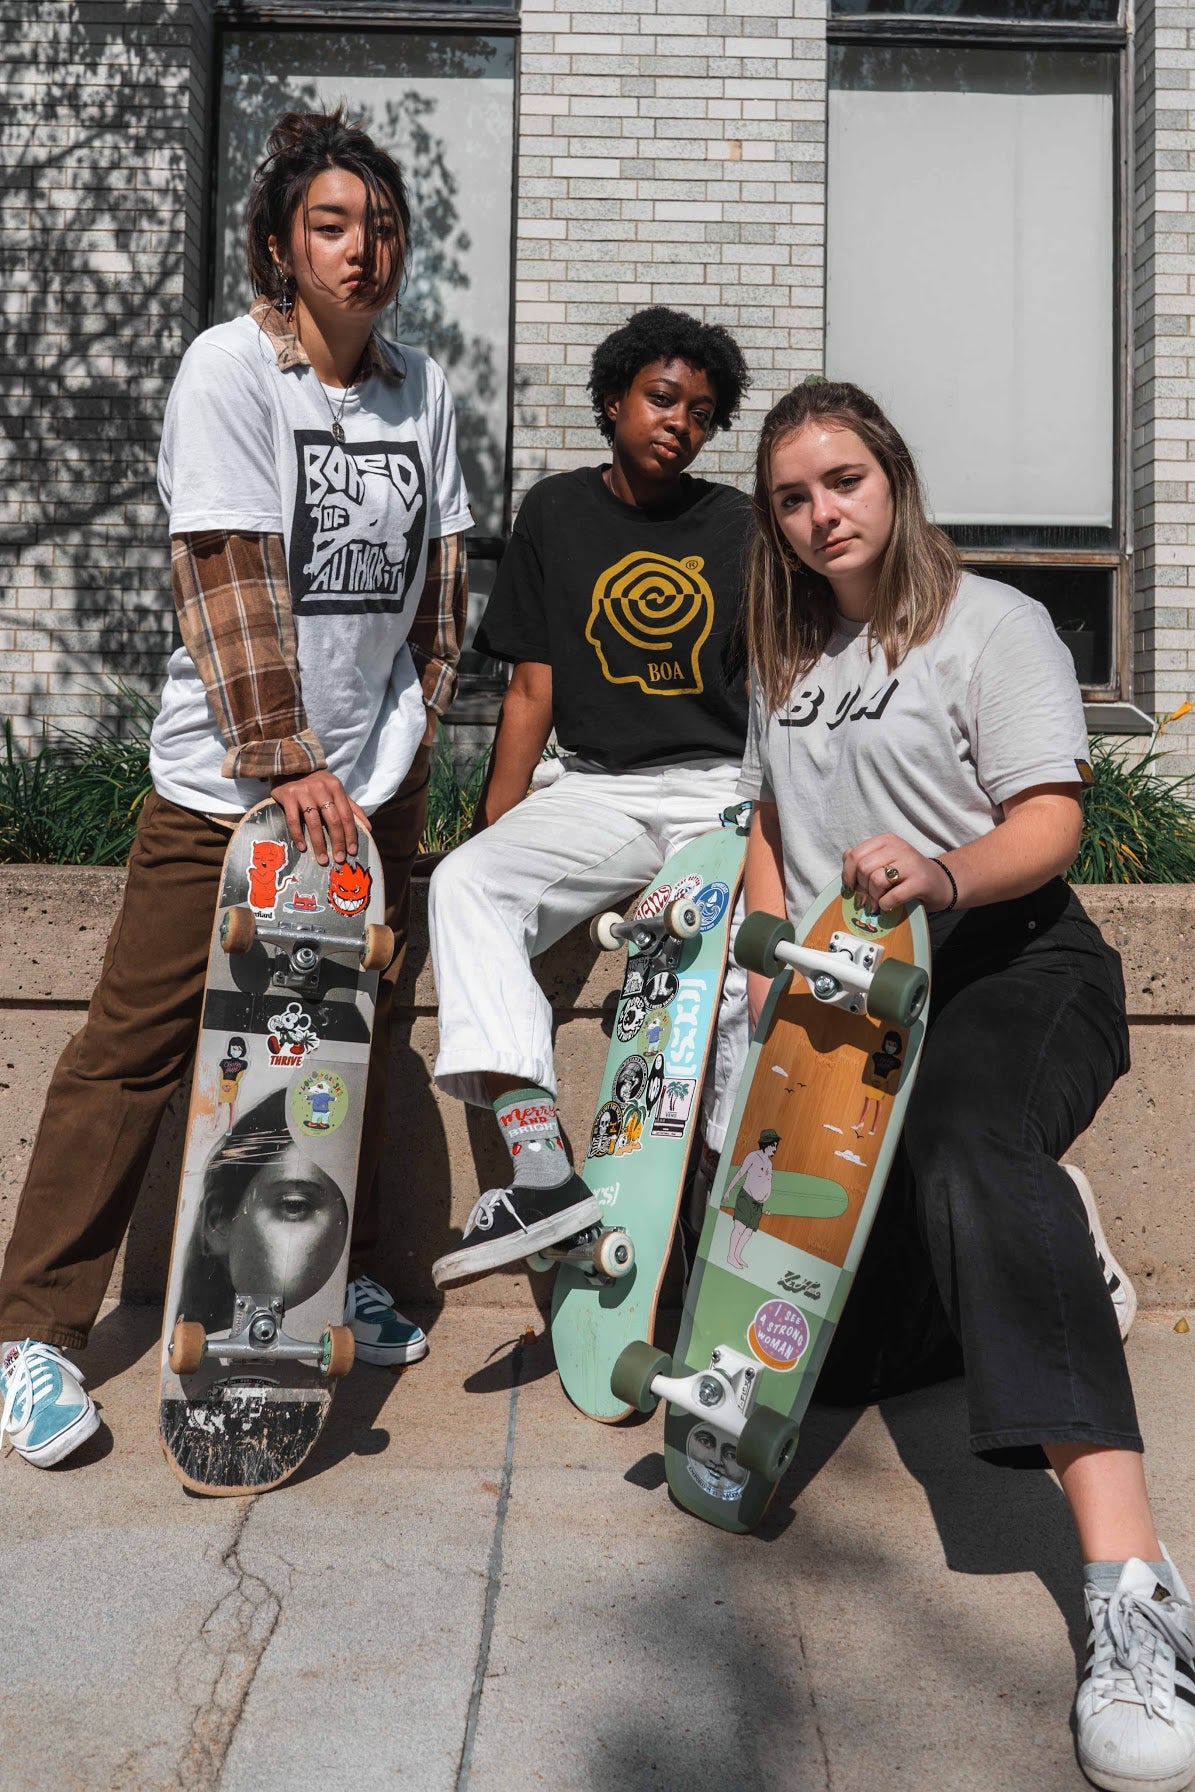 A Conversation with Lonelygrlskateco: Boston-Based Skate Collective for Historically Marginalized Skaters